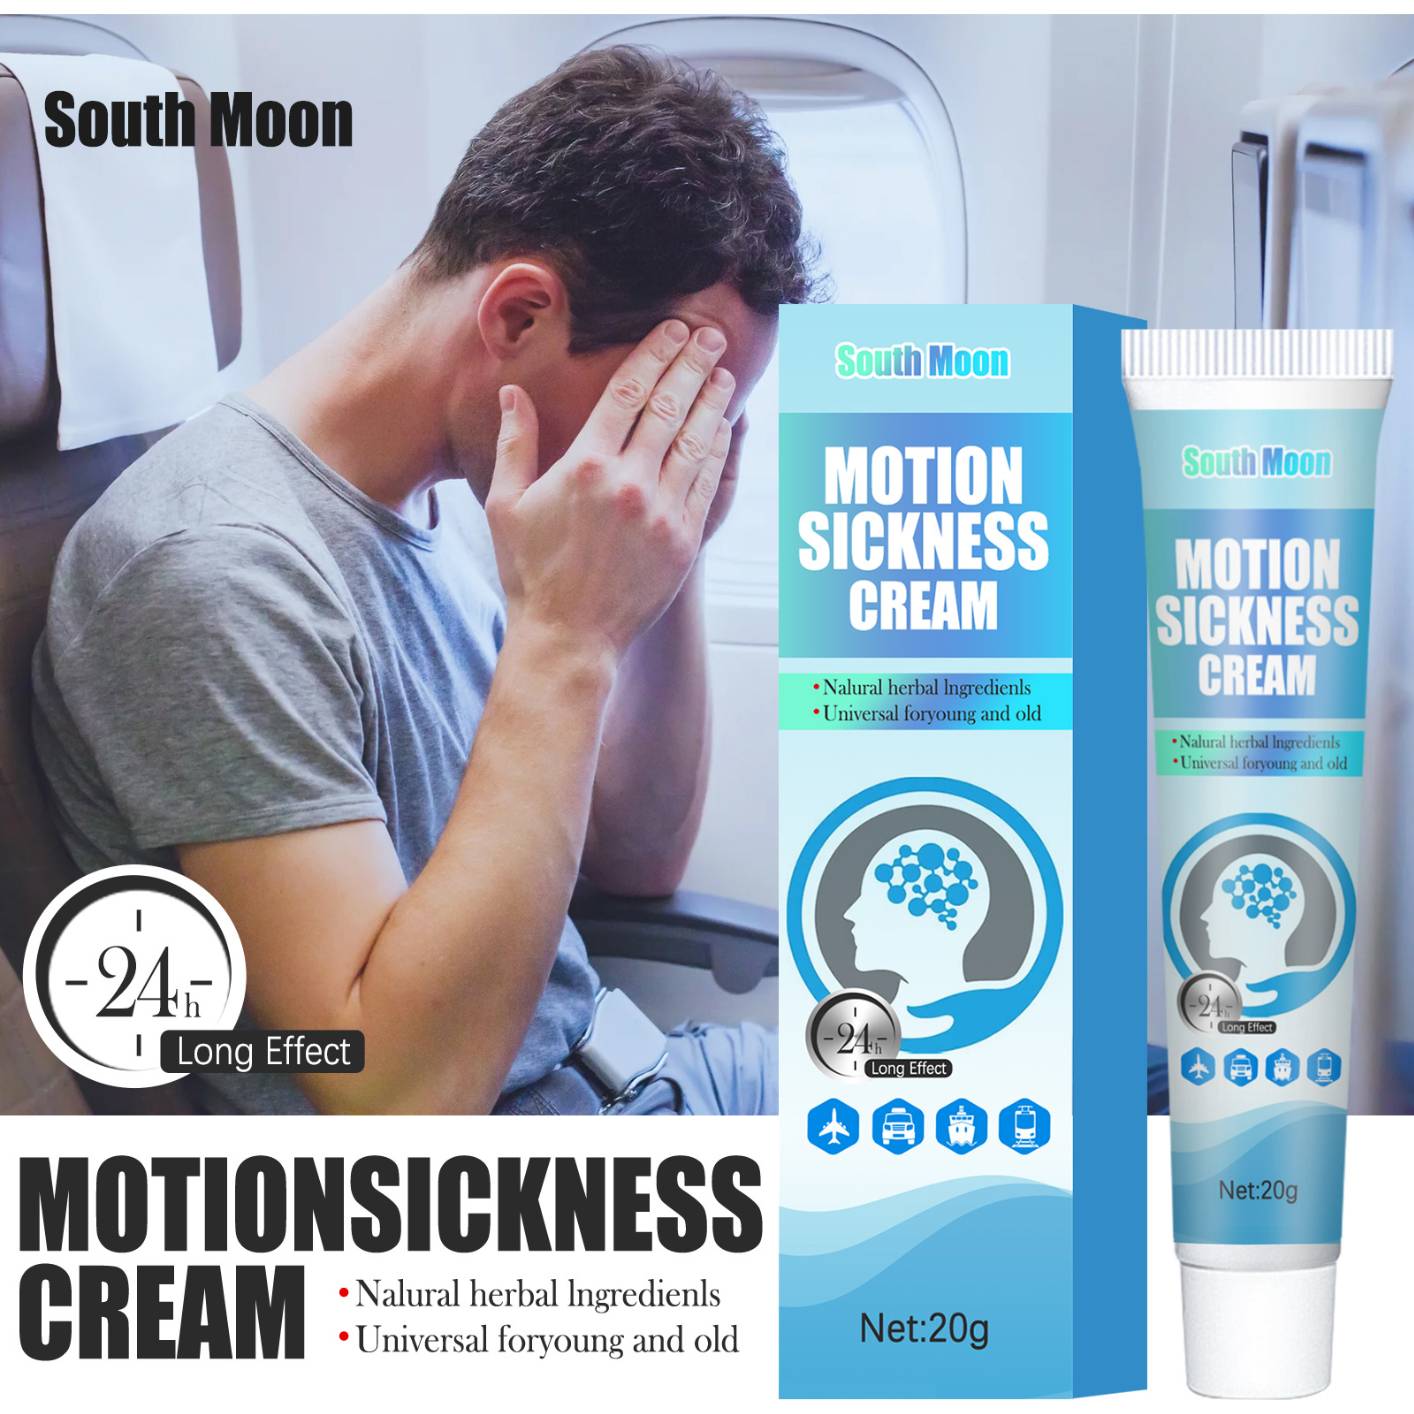 Motion Sickness Cream Works to Relieve Vomiting, Nausea, Dizziness & Other Symptoms Resulted from Sickness of Cars, Ships, Airplanes, Cruise, Trains & Other Forms of Transport Movement